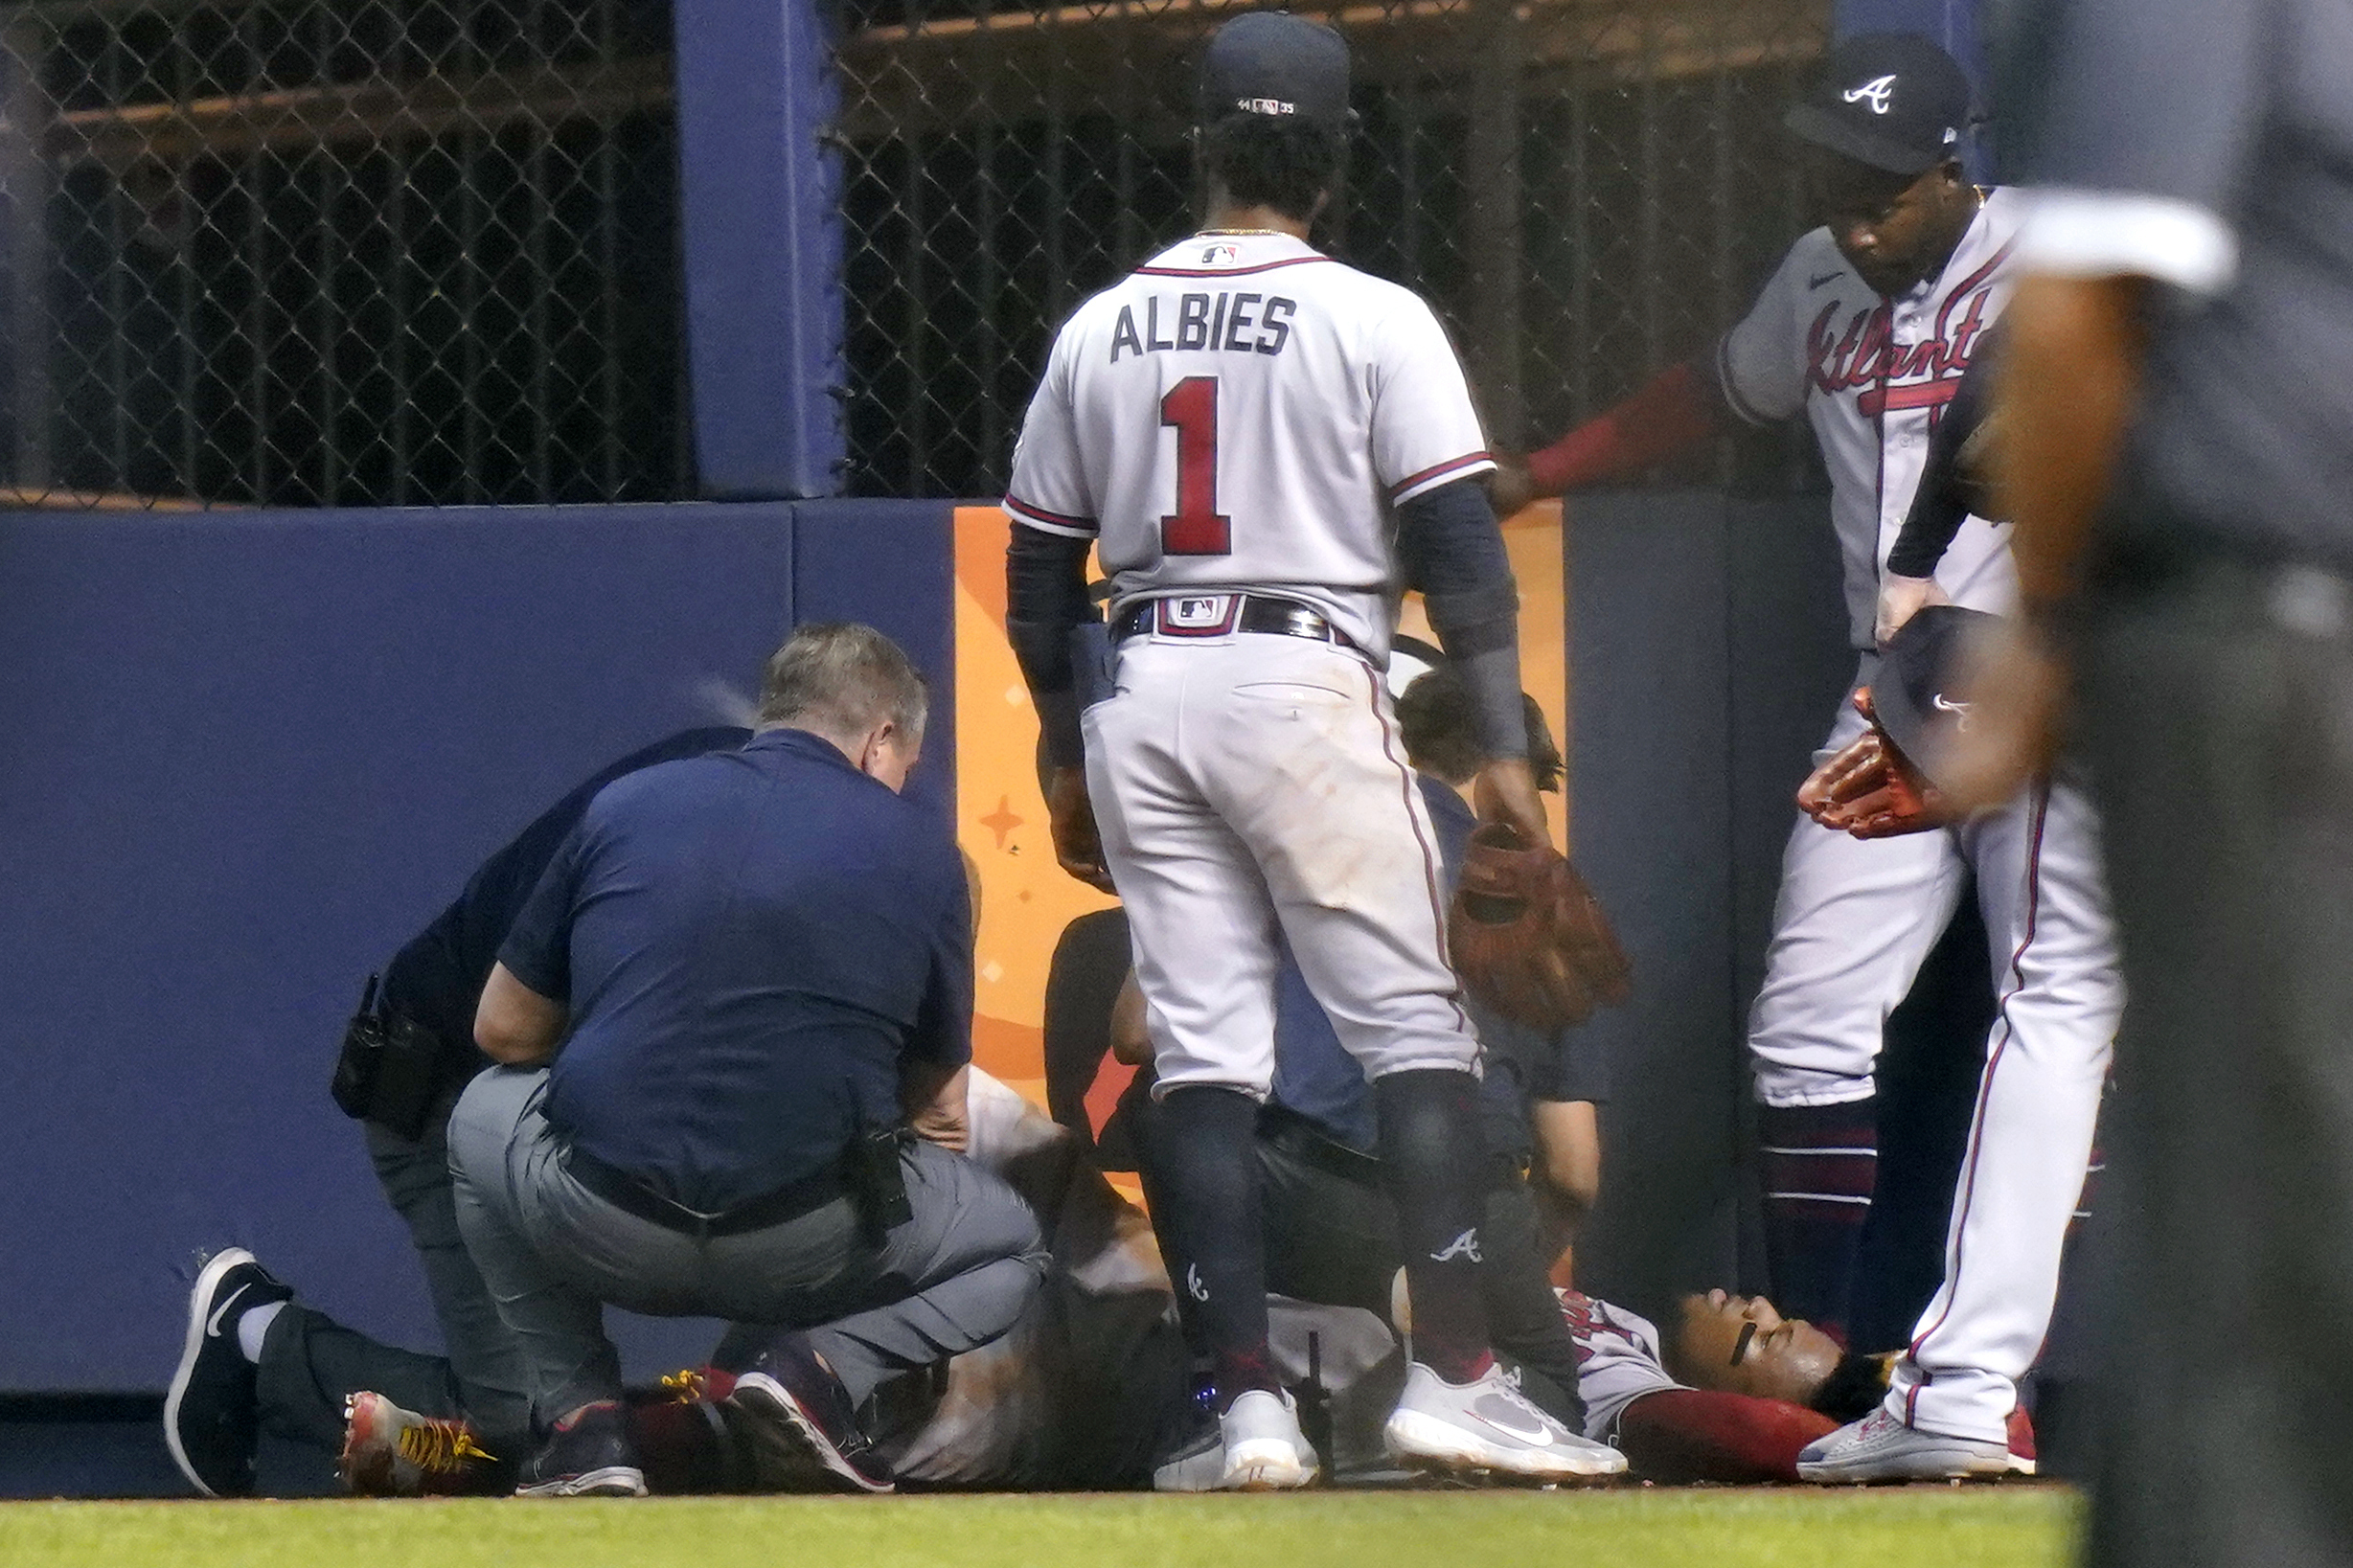 Ronald Acuña injury: Braves outfielder undergoes surgery to repair